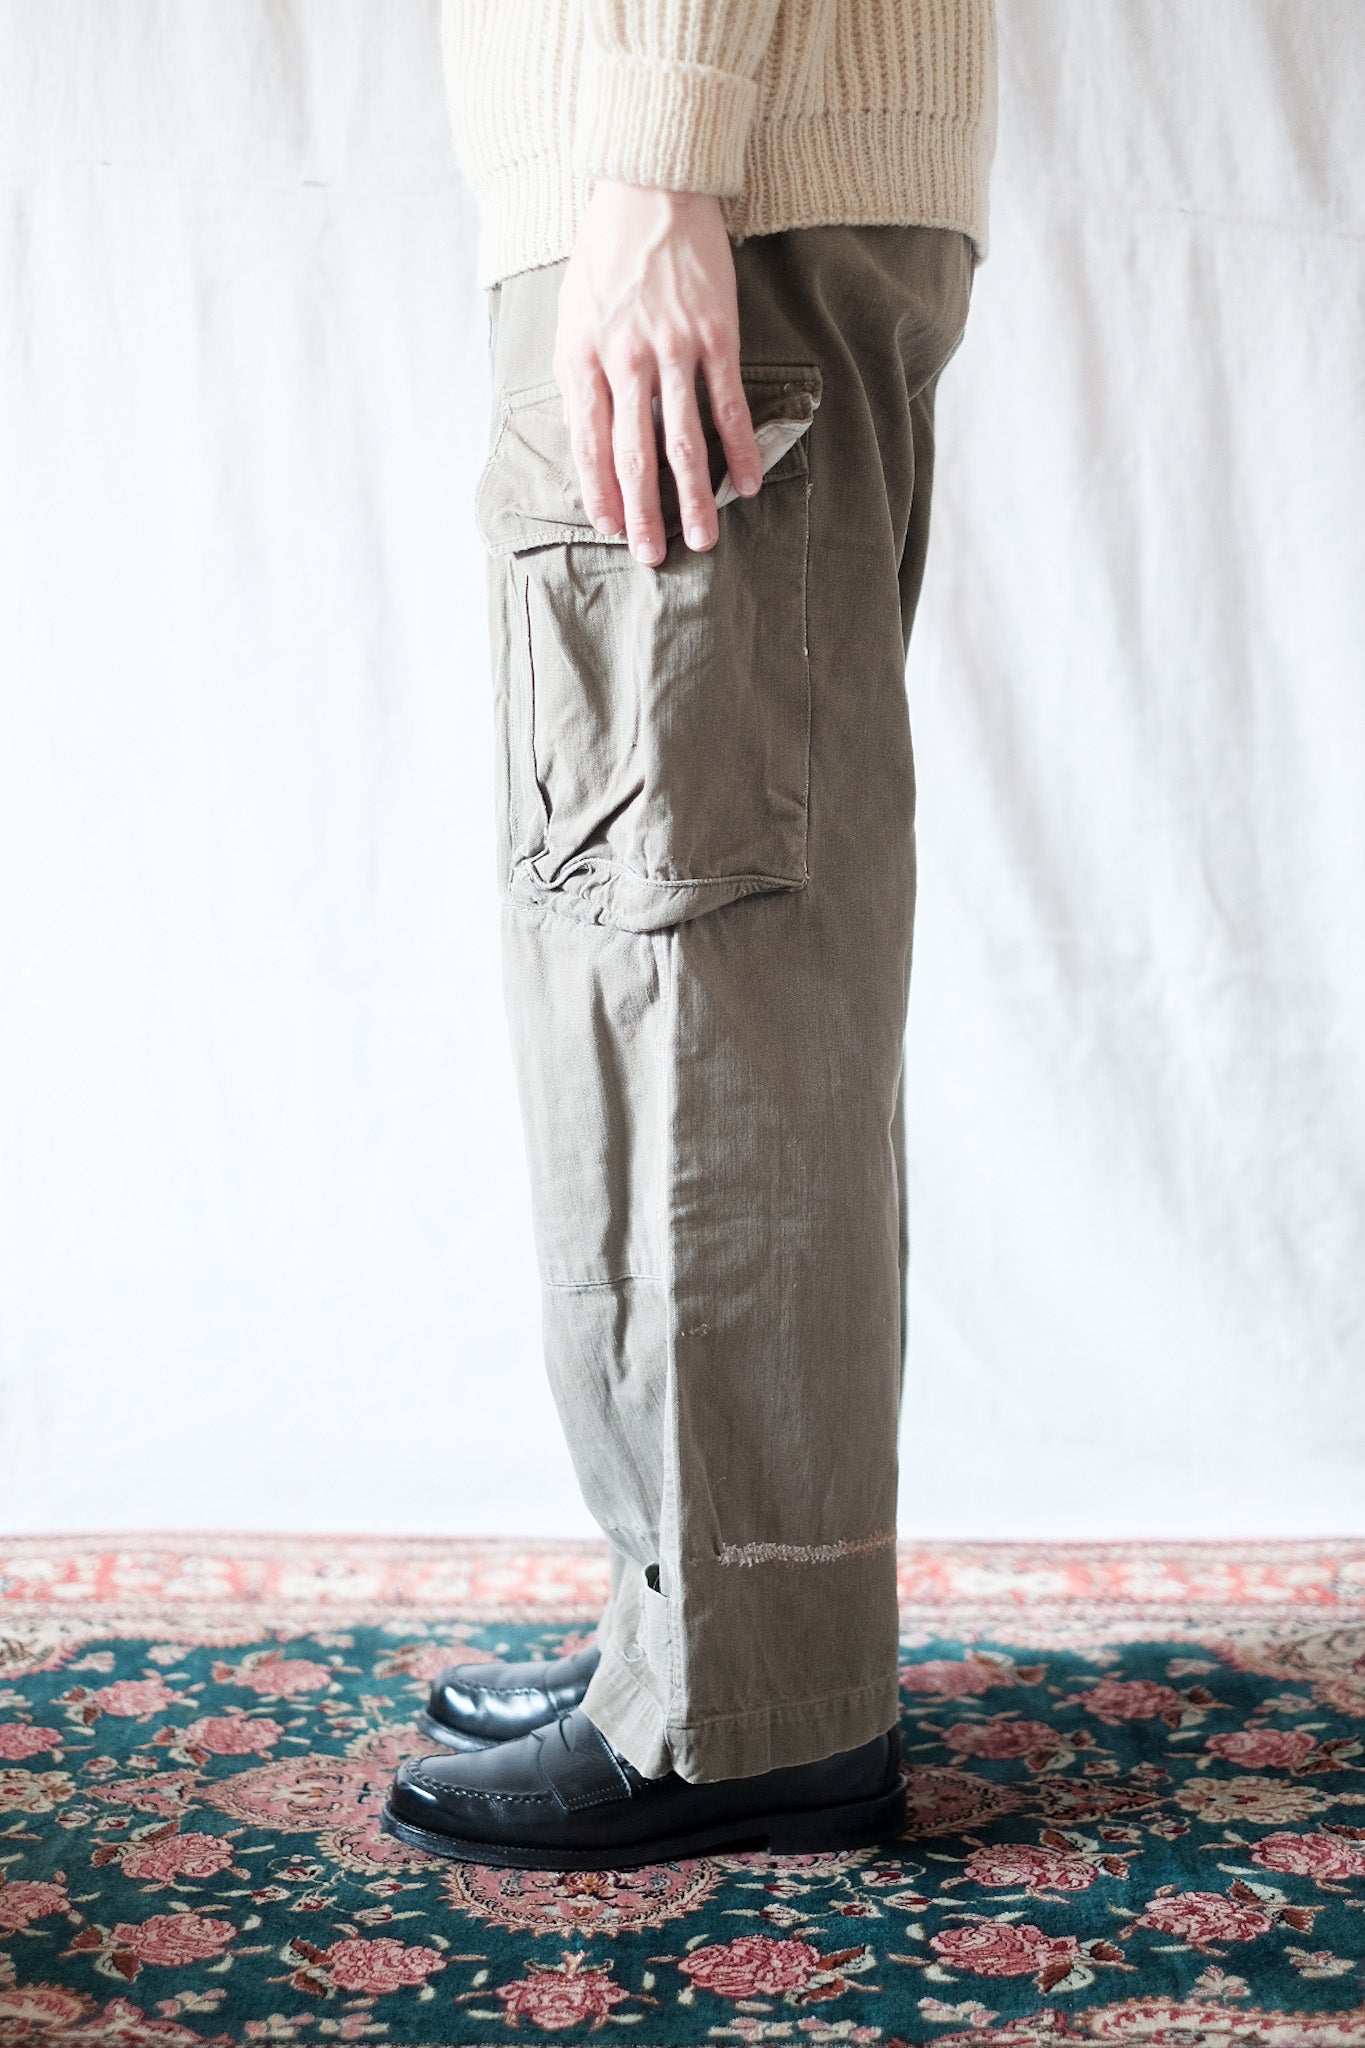 【~60's】French Army M47 Field Trousers Size.21